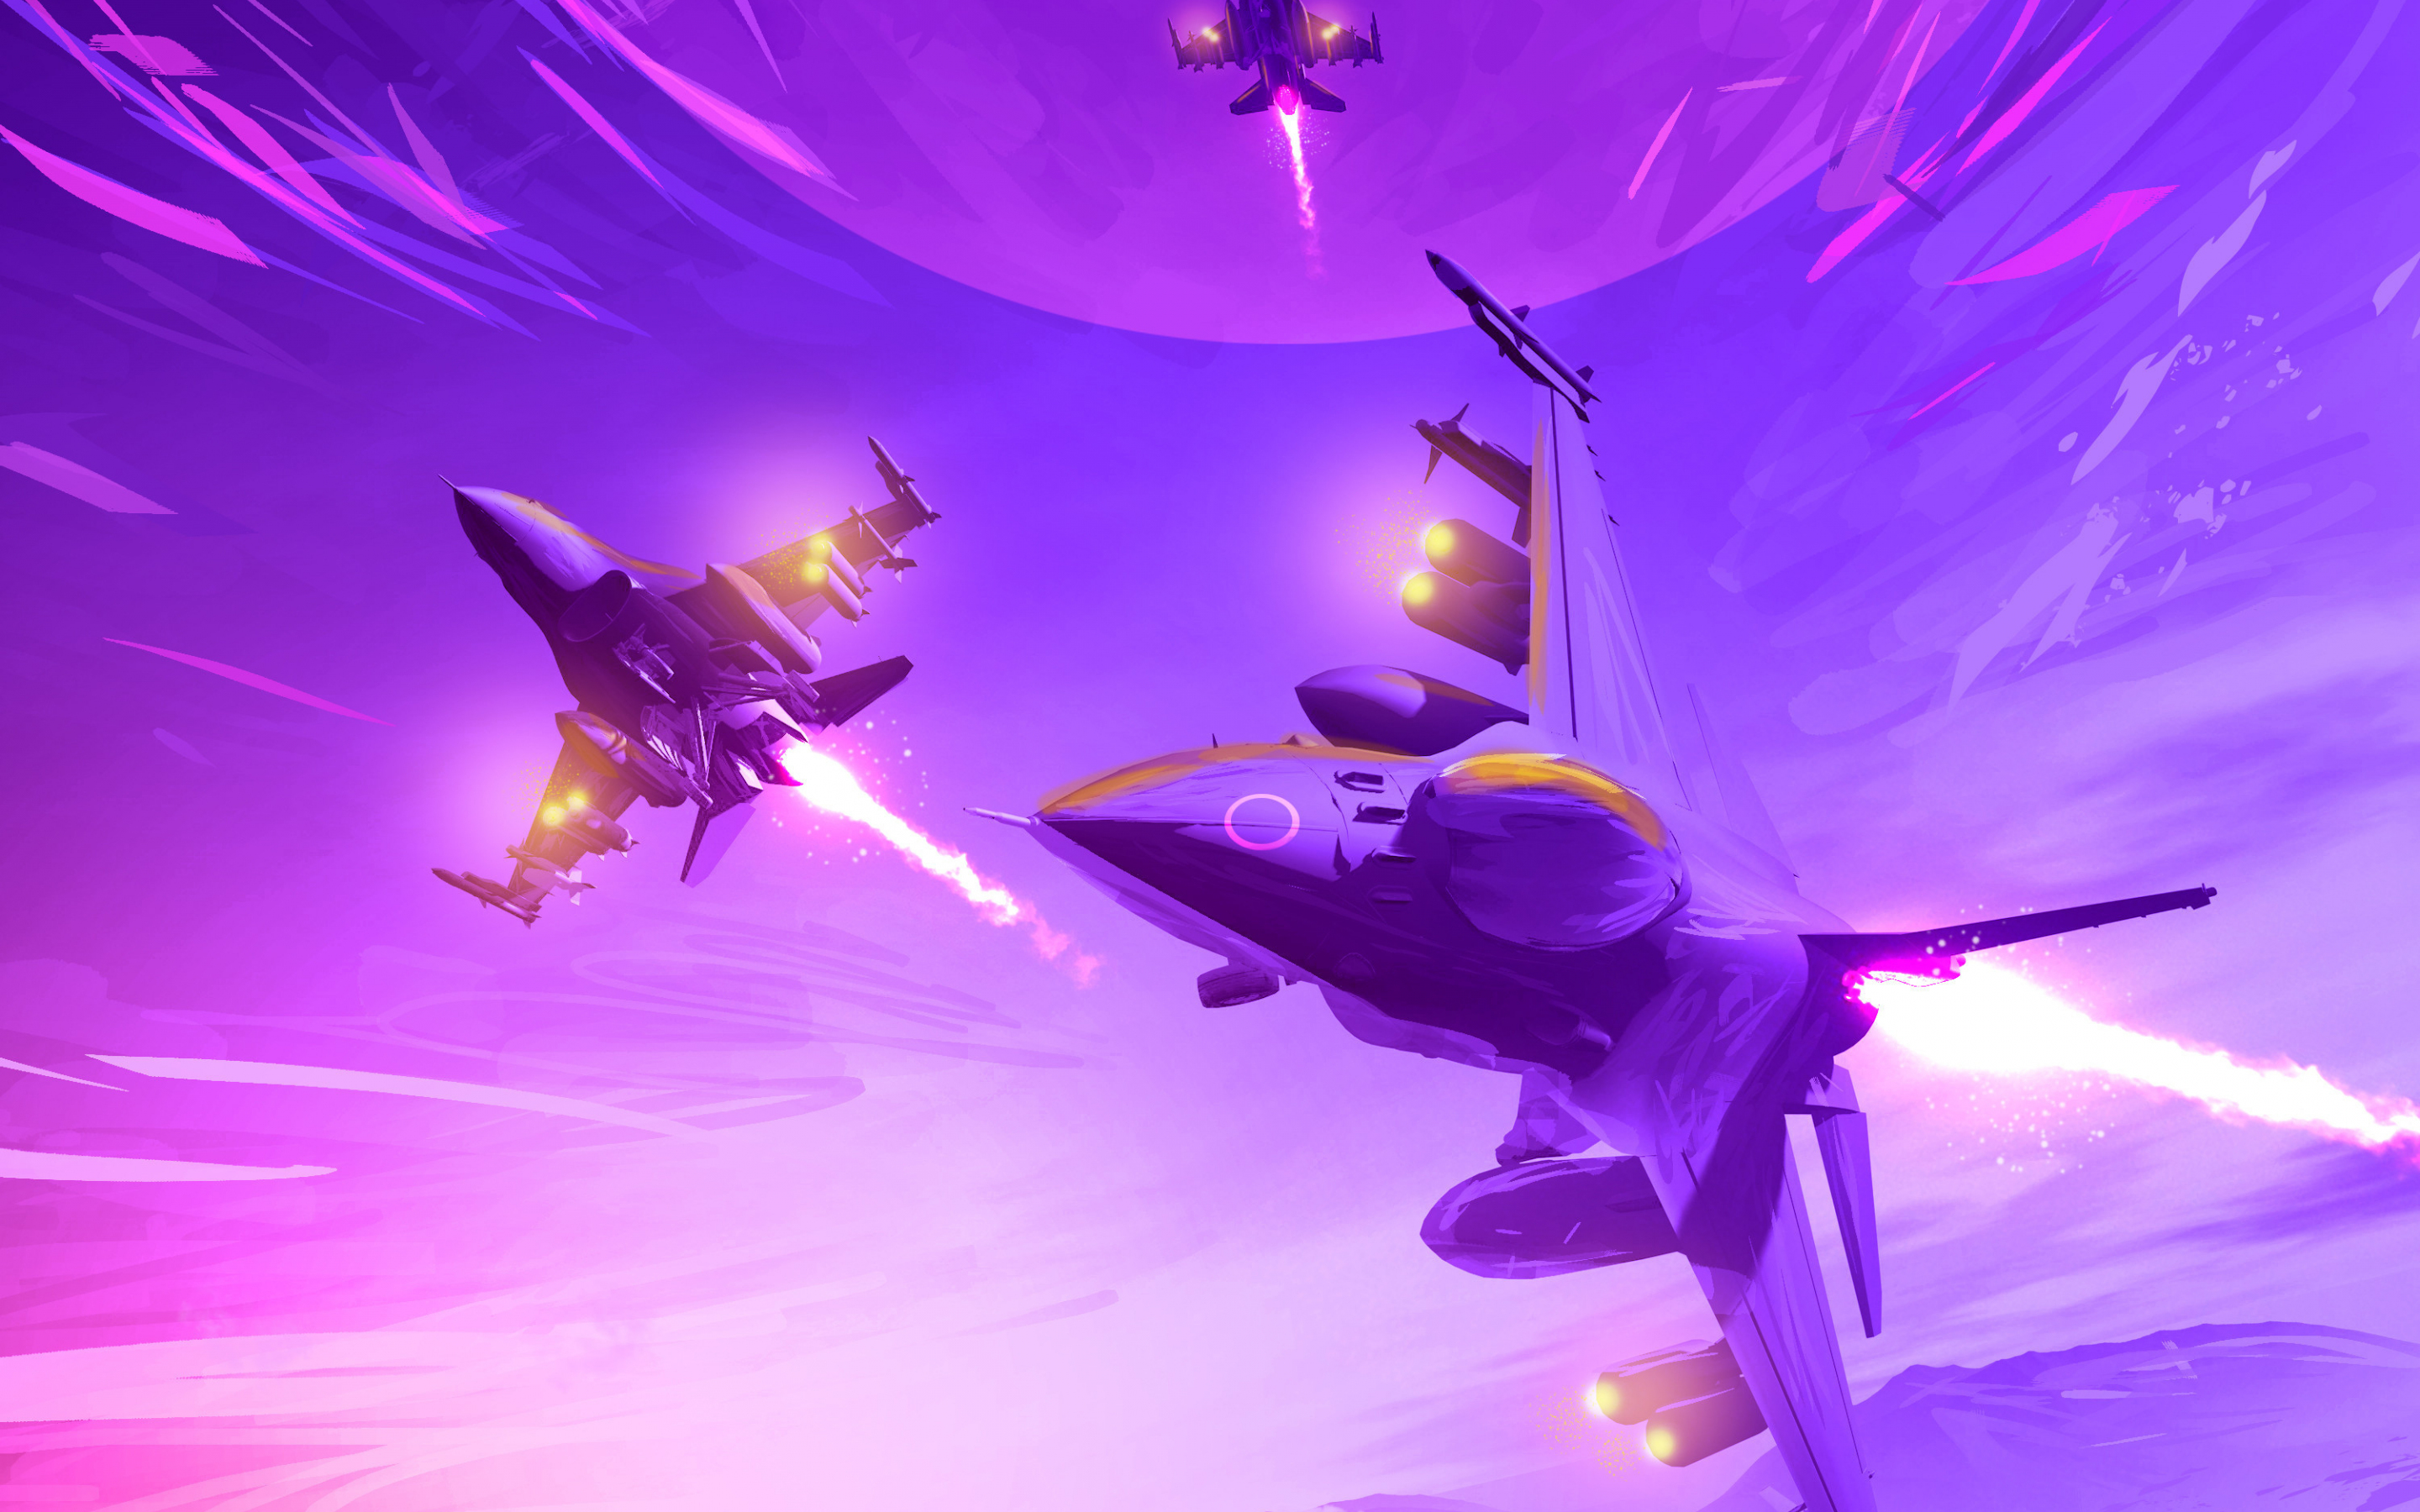 Fighter airplanes, game, art, 2880x1800 wallpaper